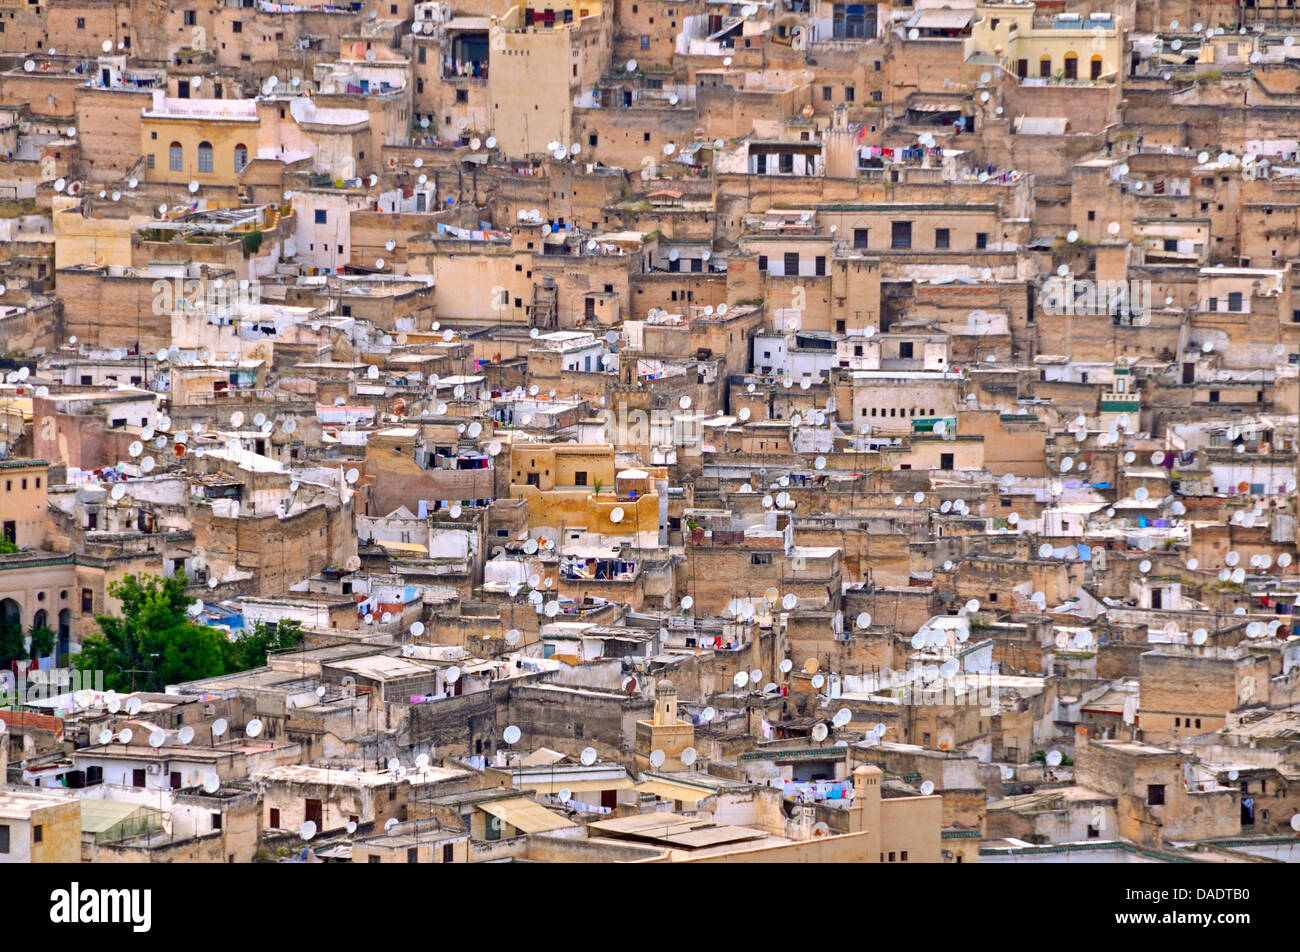 sea of houses and satellite dishes in the old city, Morocco, Fes Stock Photo